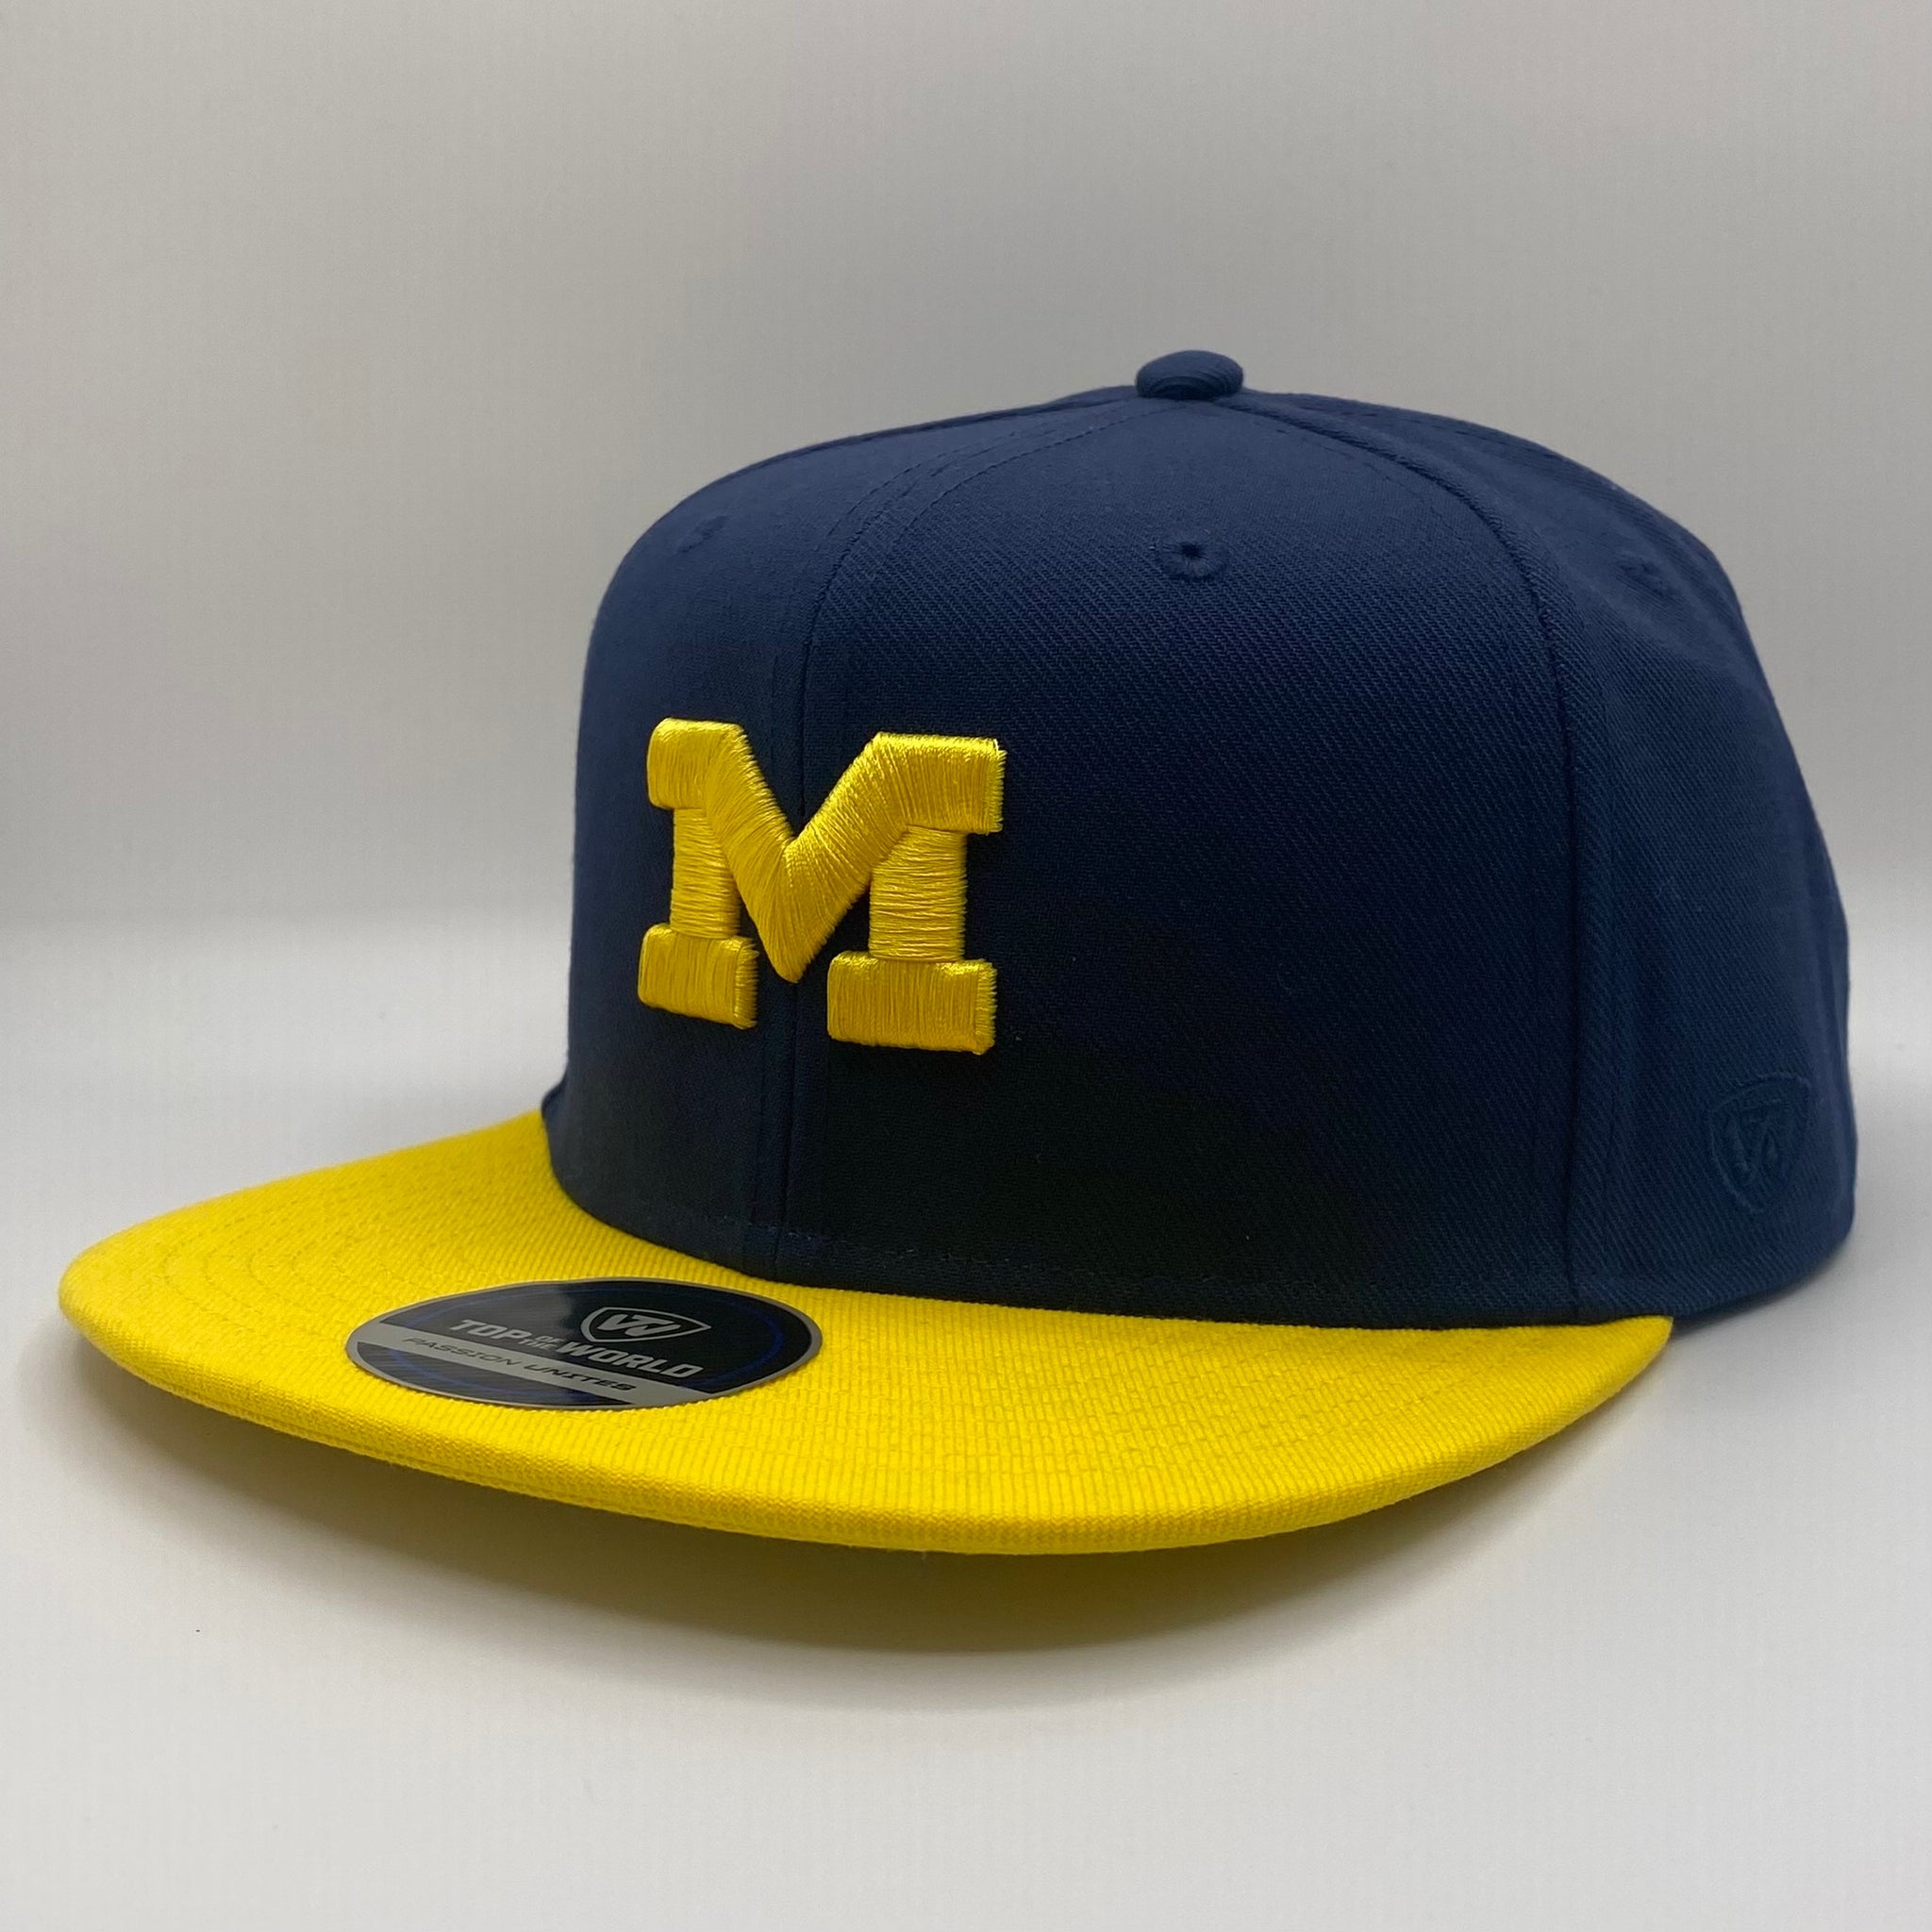 Michigan Wolverines Top of the World Victory Flat Bill Snapback Hat - Navy/Yellow